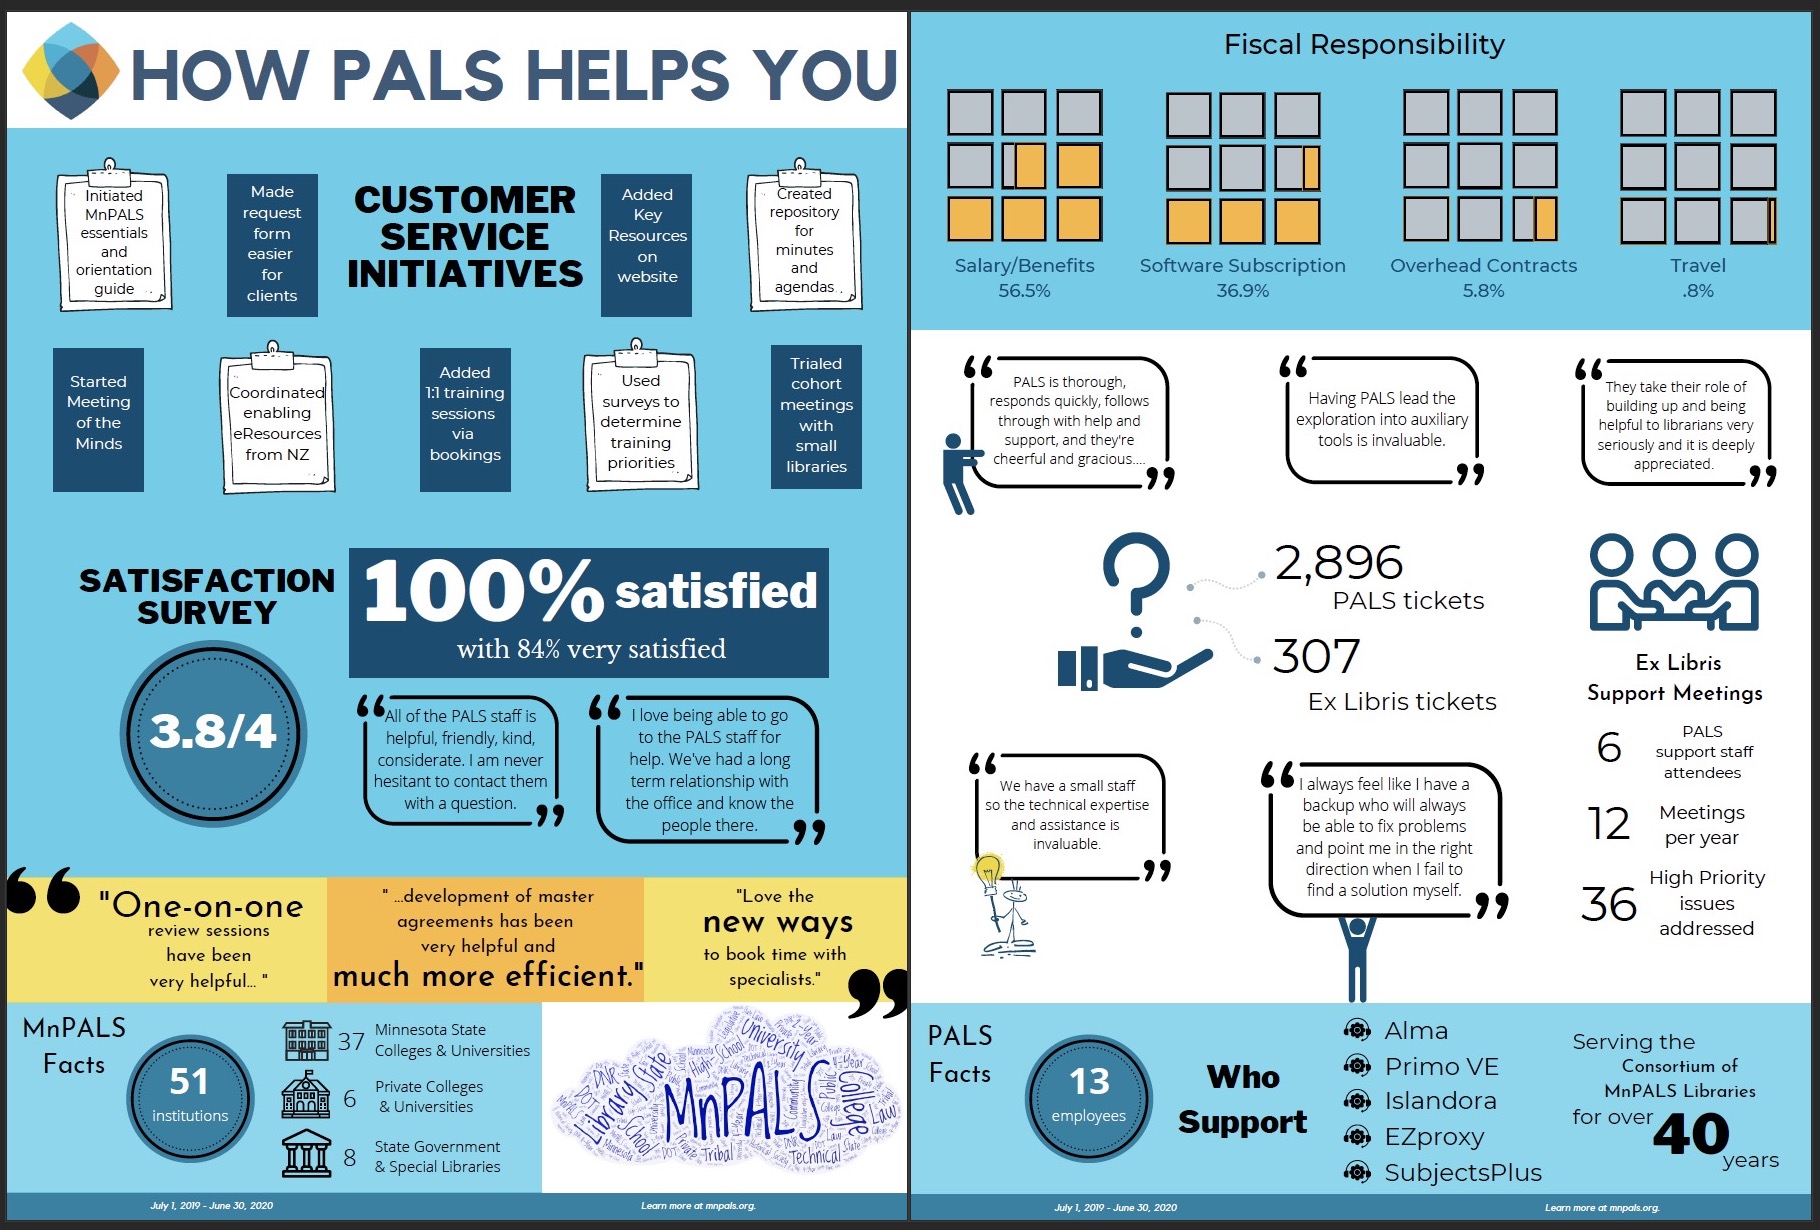 How PALS Helps infographic